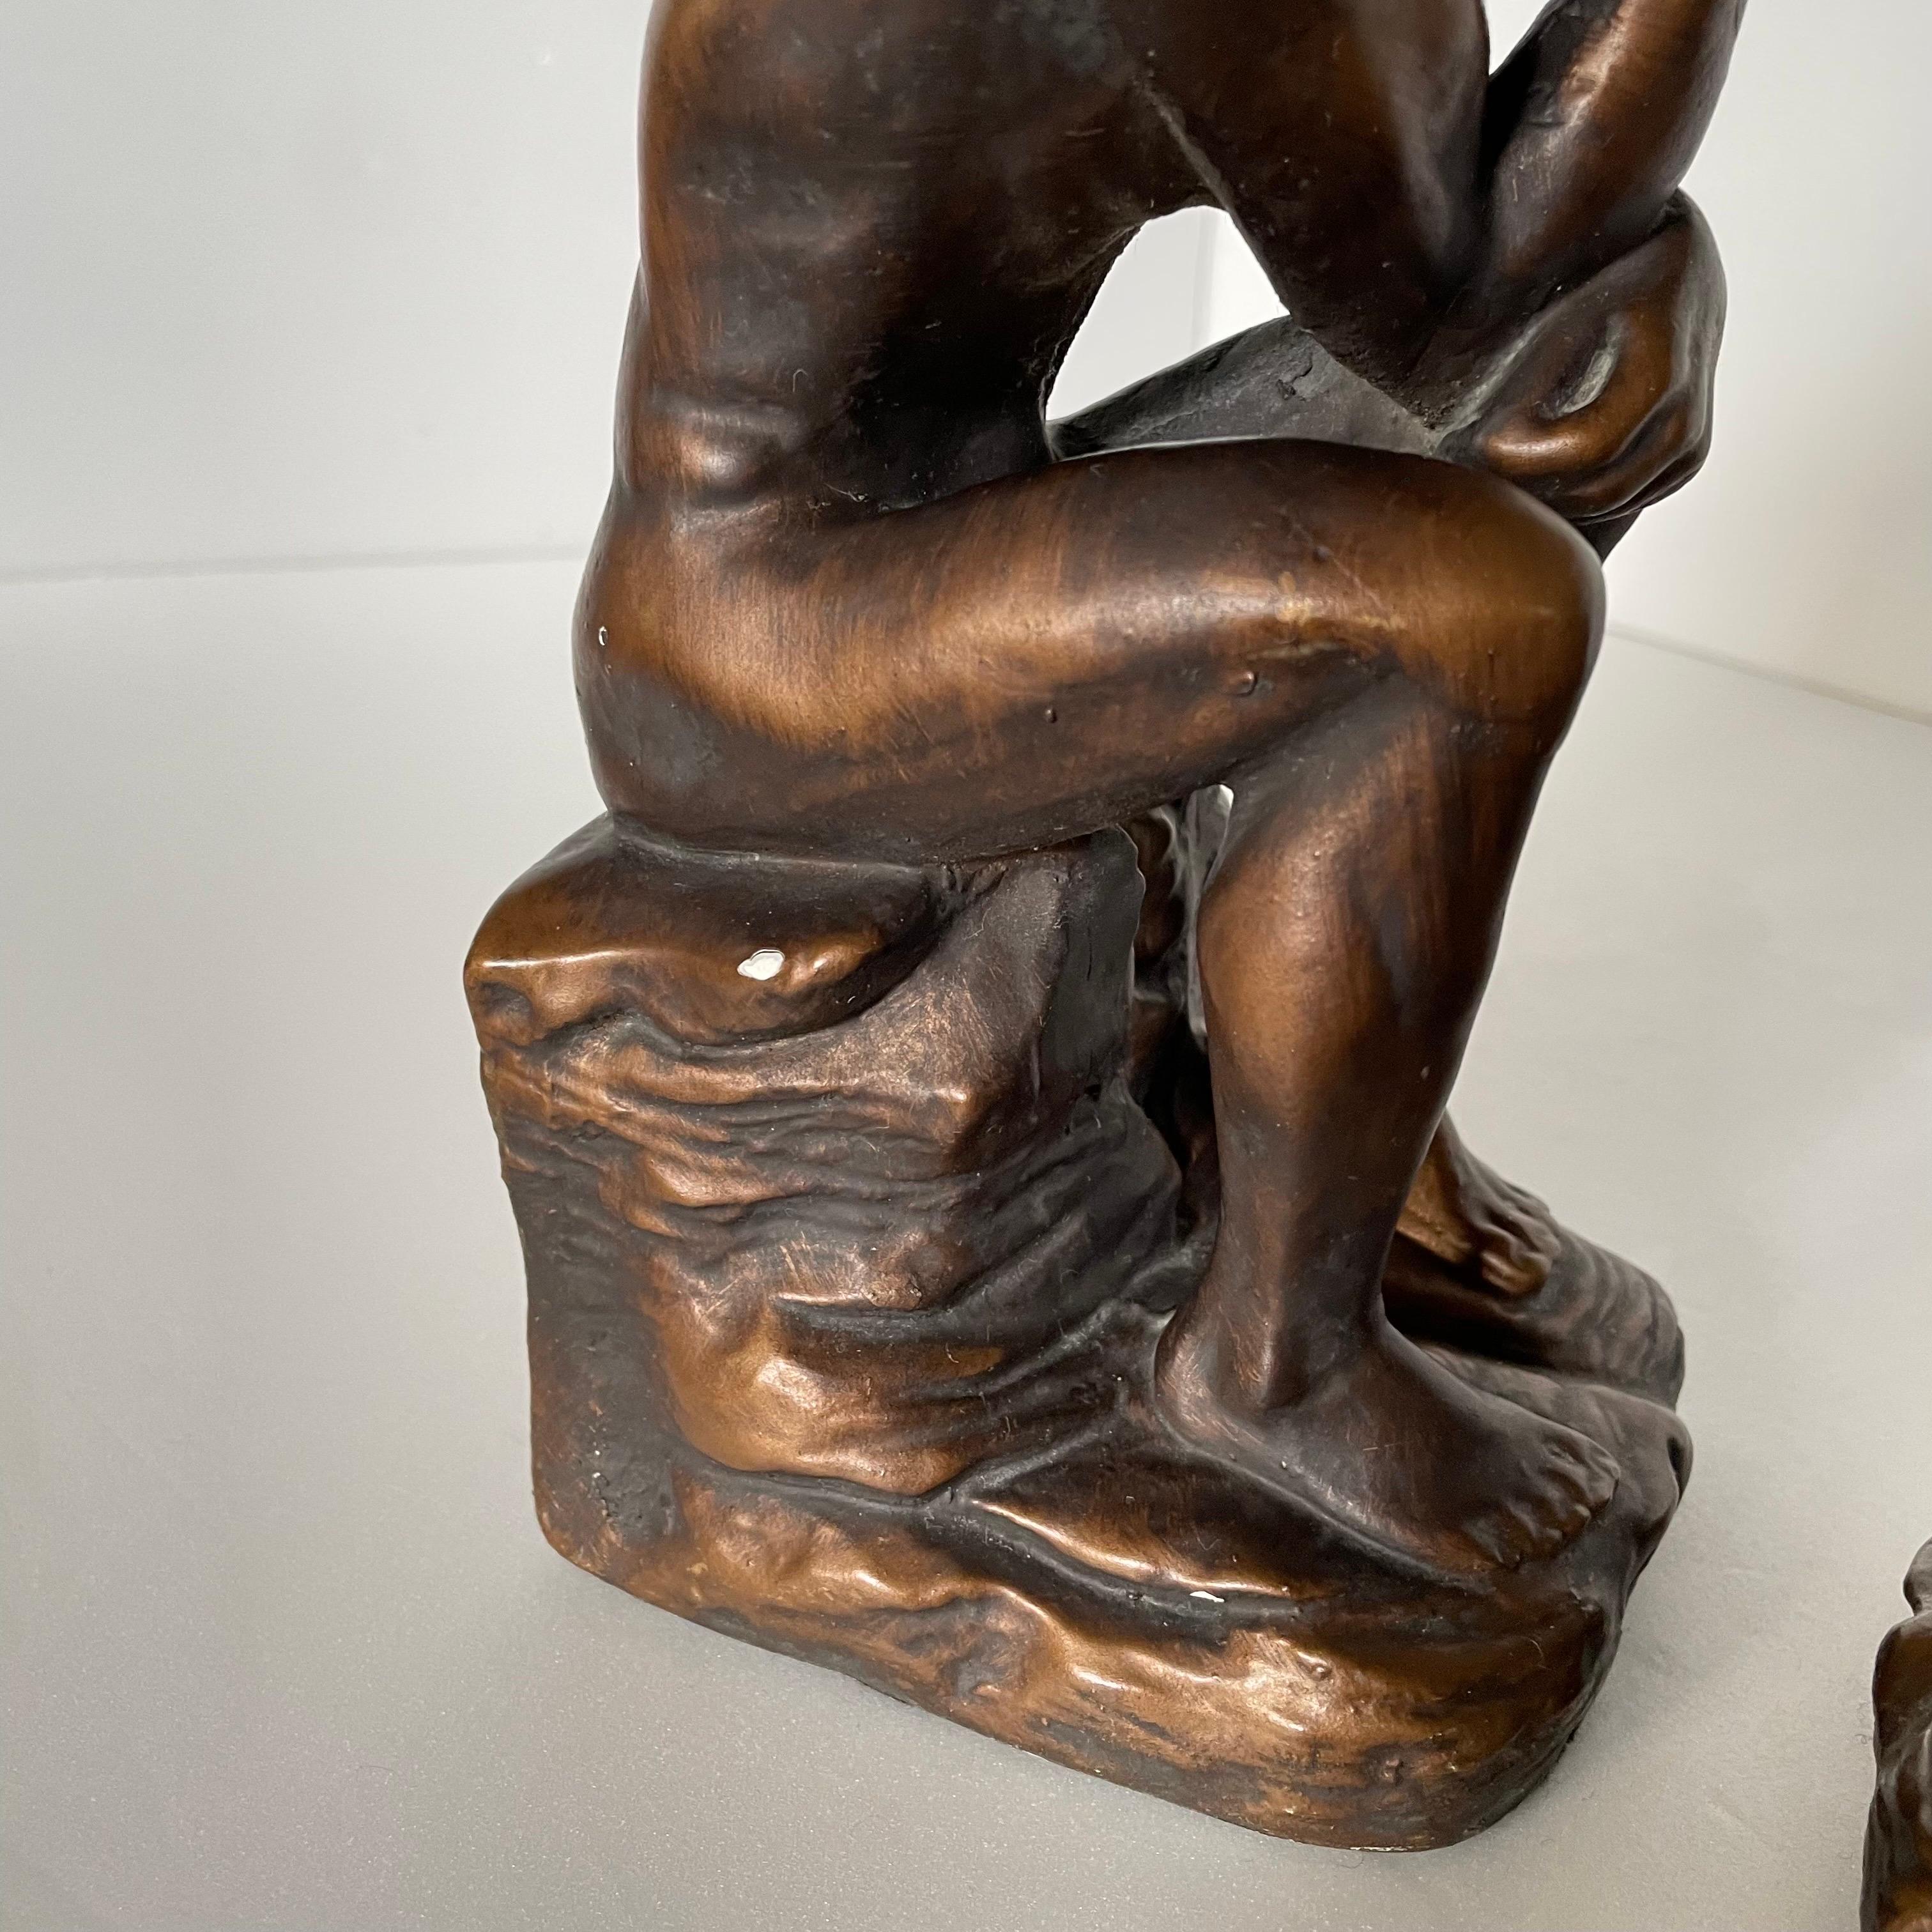 Molded Pair of Antique Male Nude Figural Bookends - the Thinker, 1960s For Sale